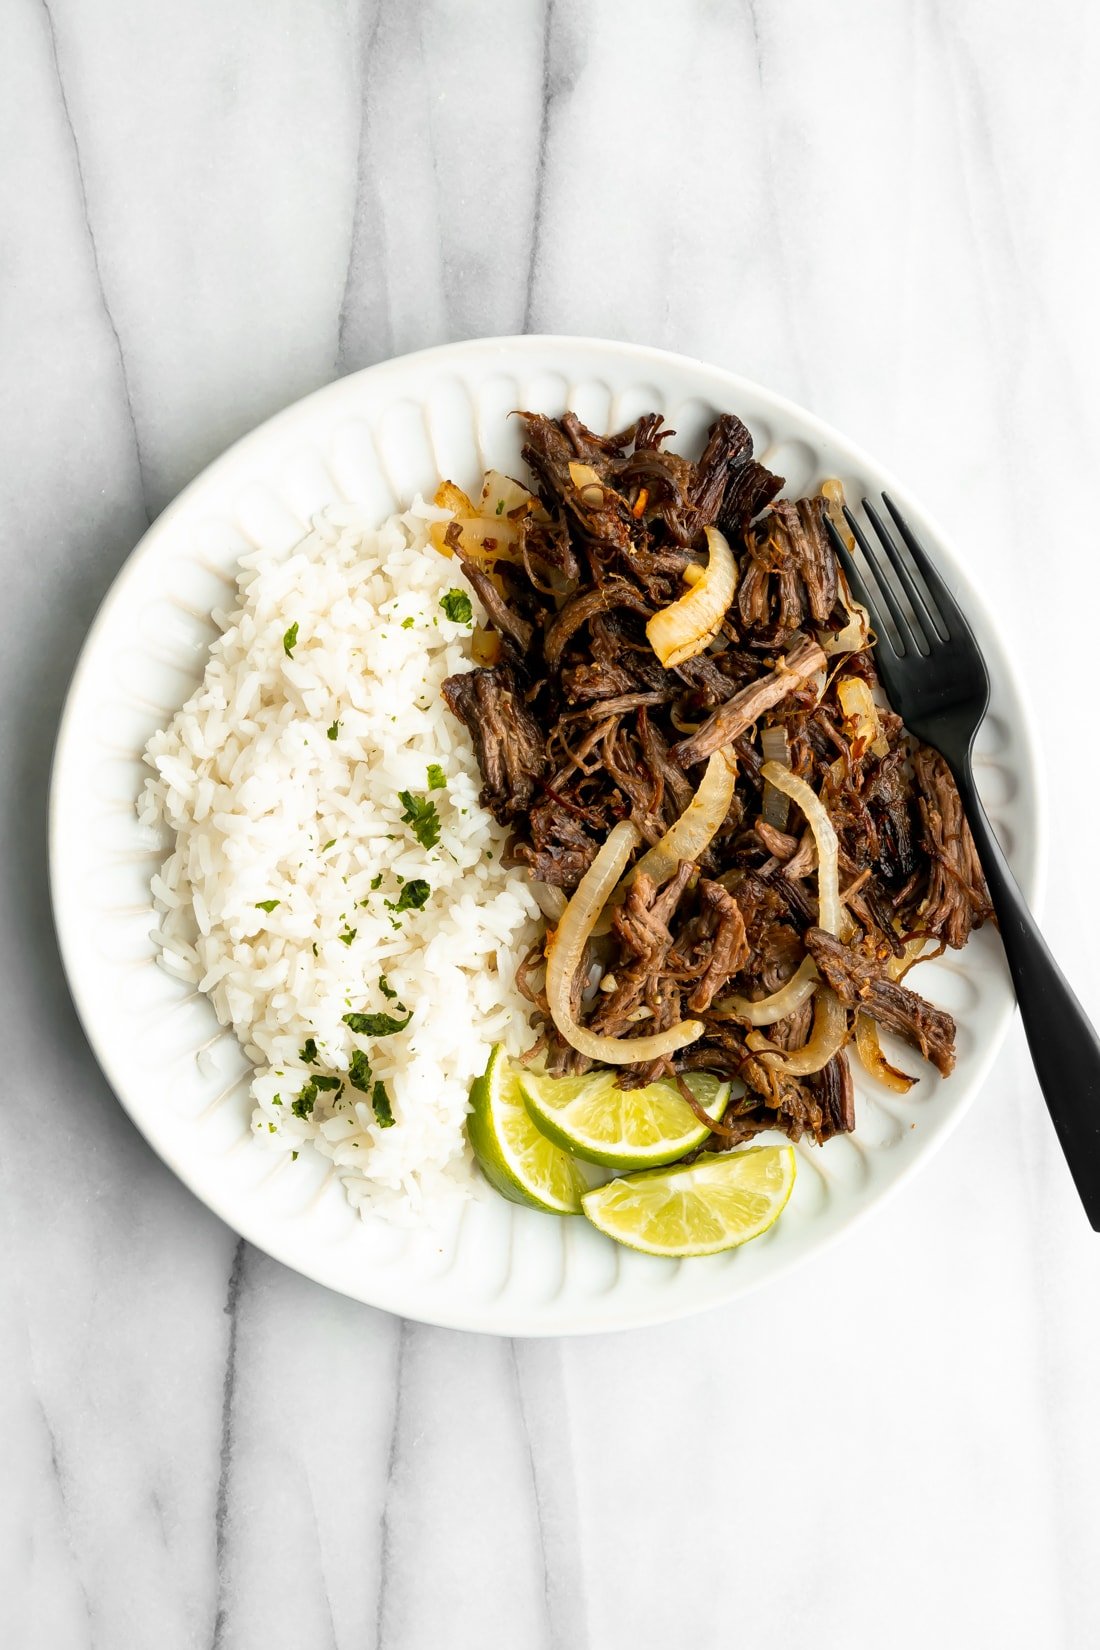 shredded fried beef with white rice and lime wedges on a white plate on a marble surface